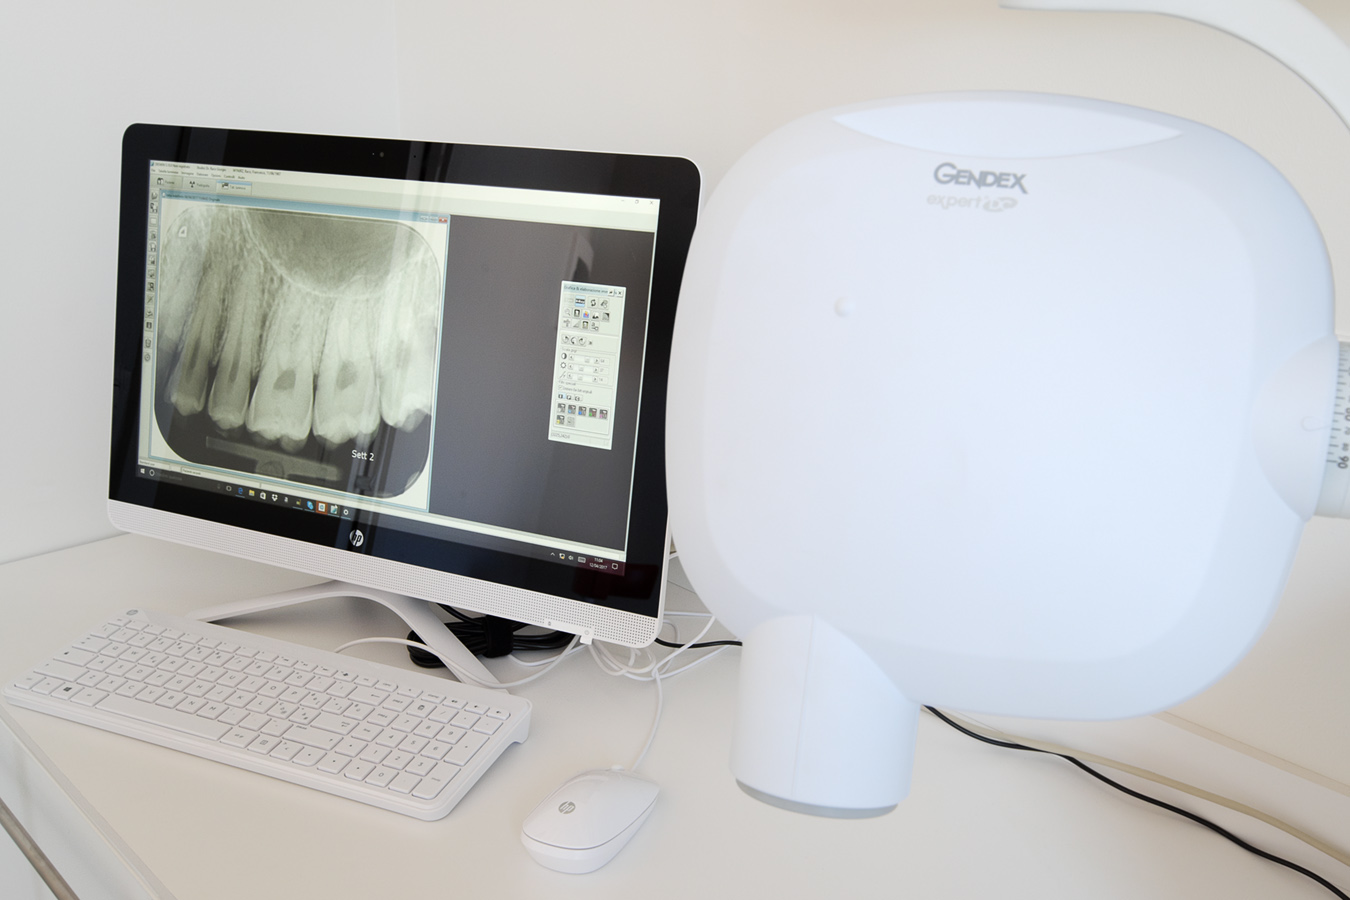 At the dentist: a computer screen displaying  a dental x-ray image together with the x-ray machine that created it